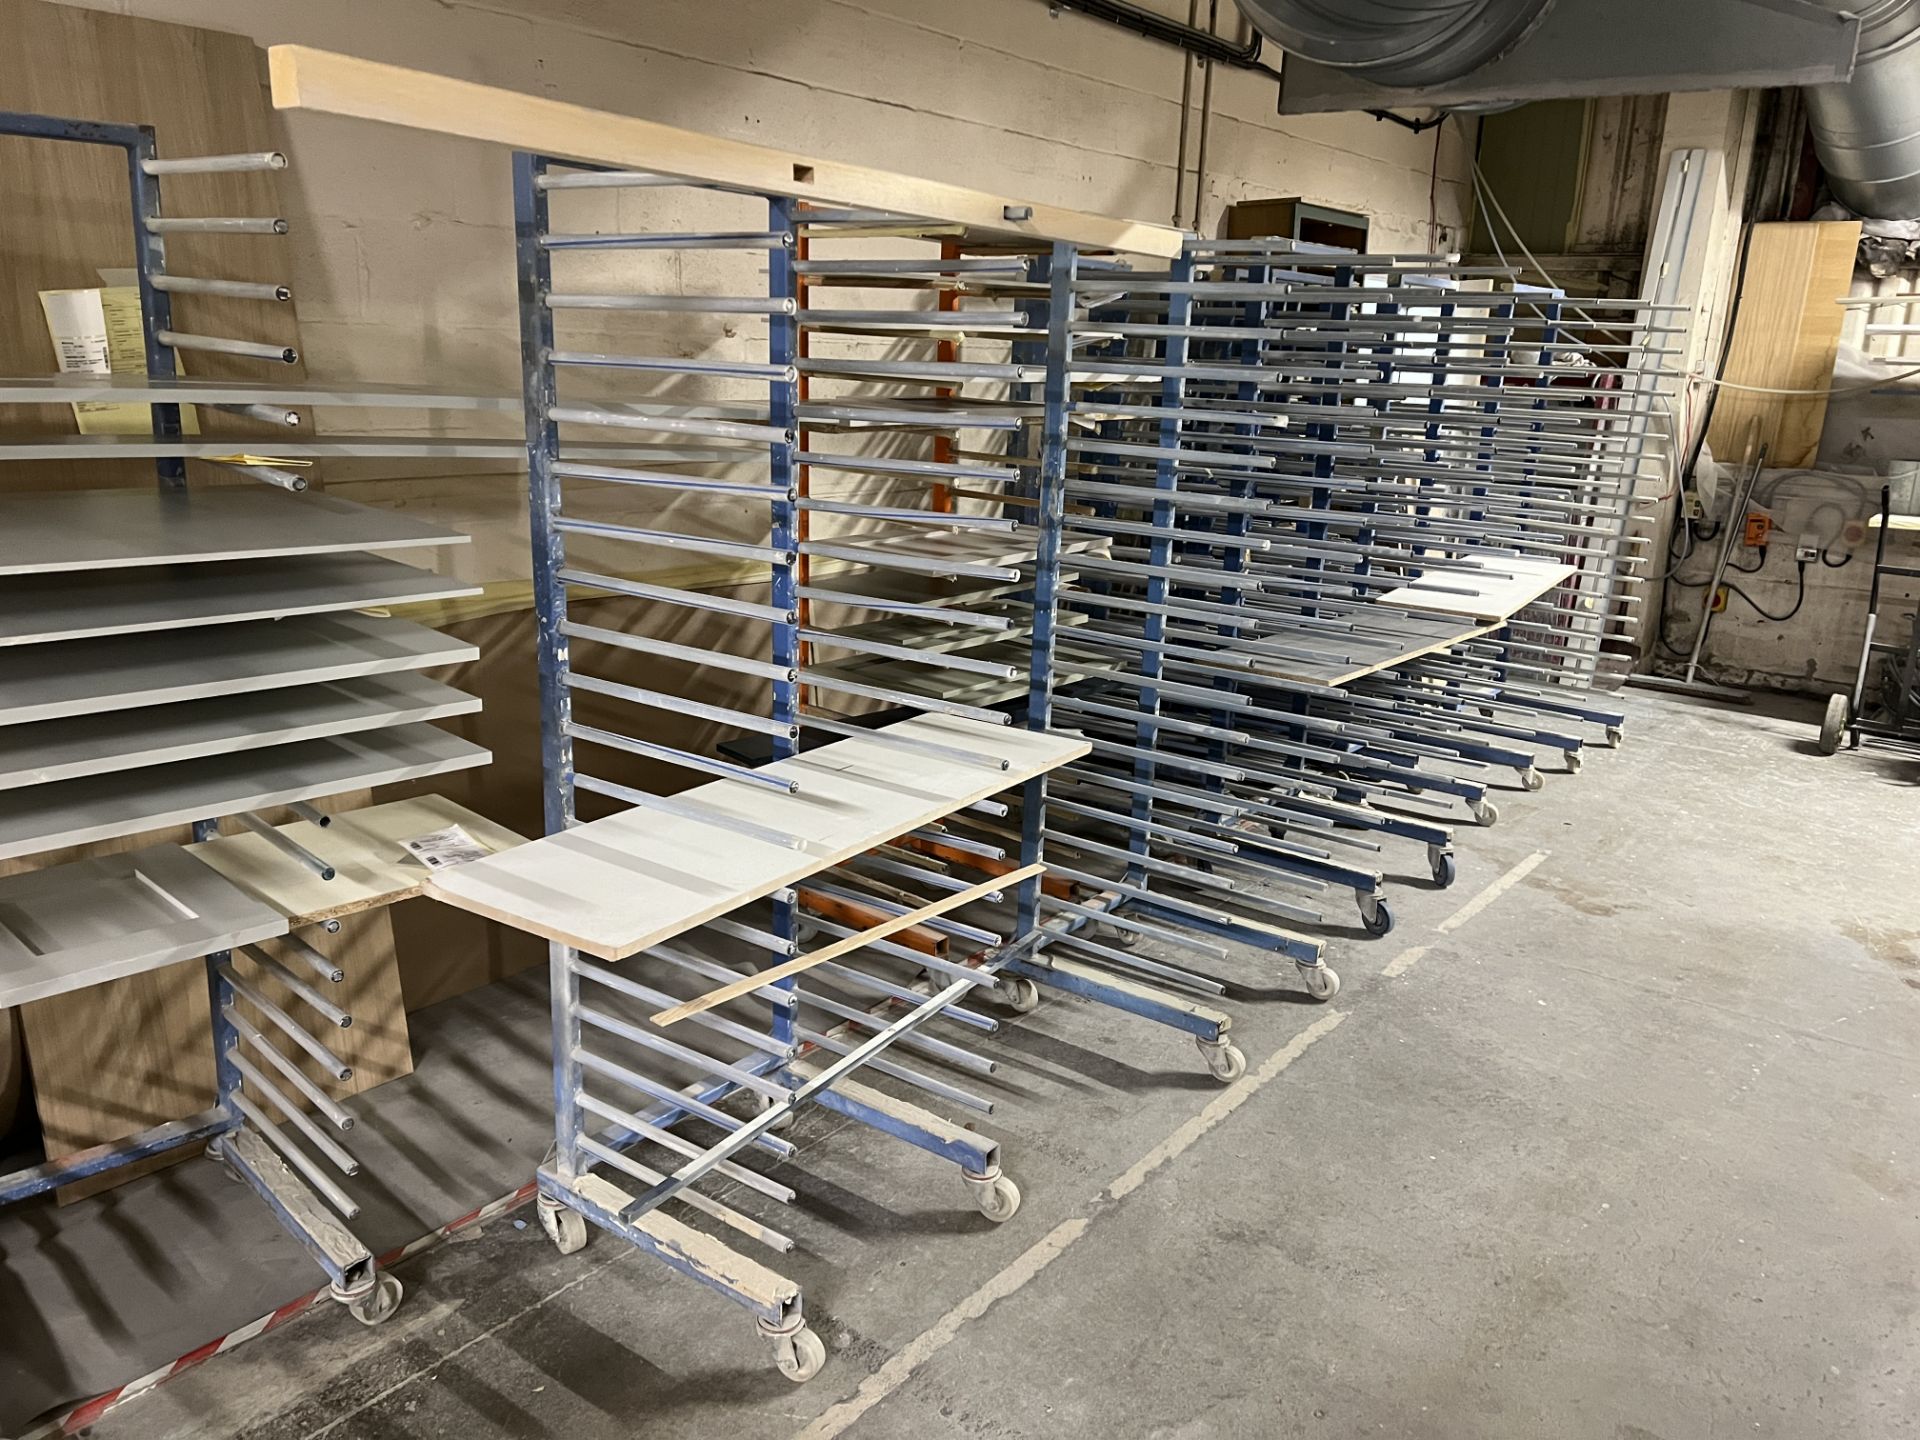 28 x Multi arm drying trolleys, approx. size 570mm x 550mm x 1.88m, location Manor Building - Image 2 of 4